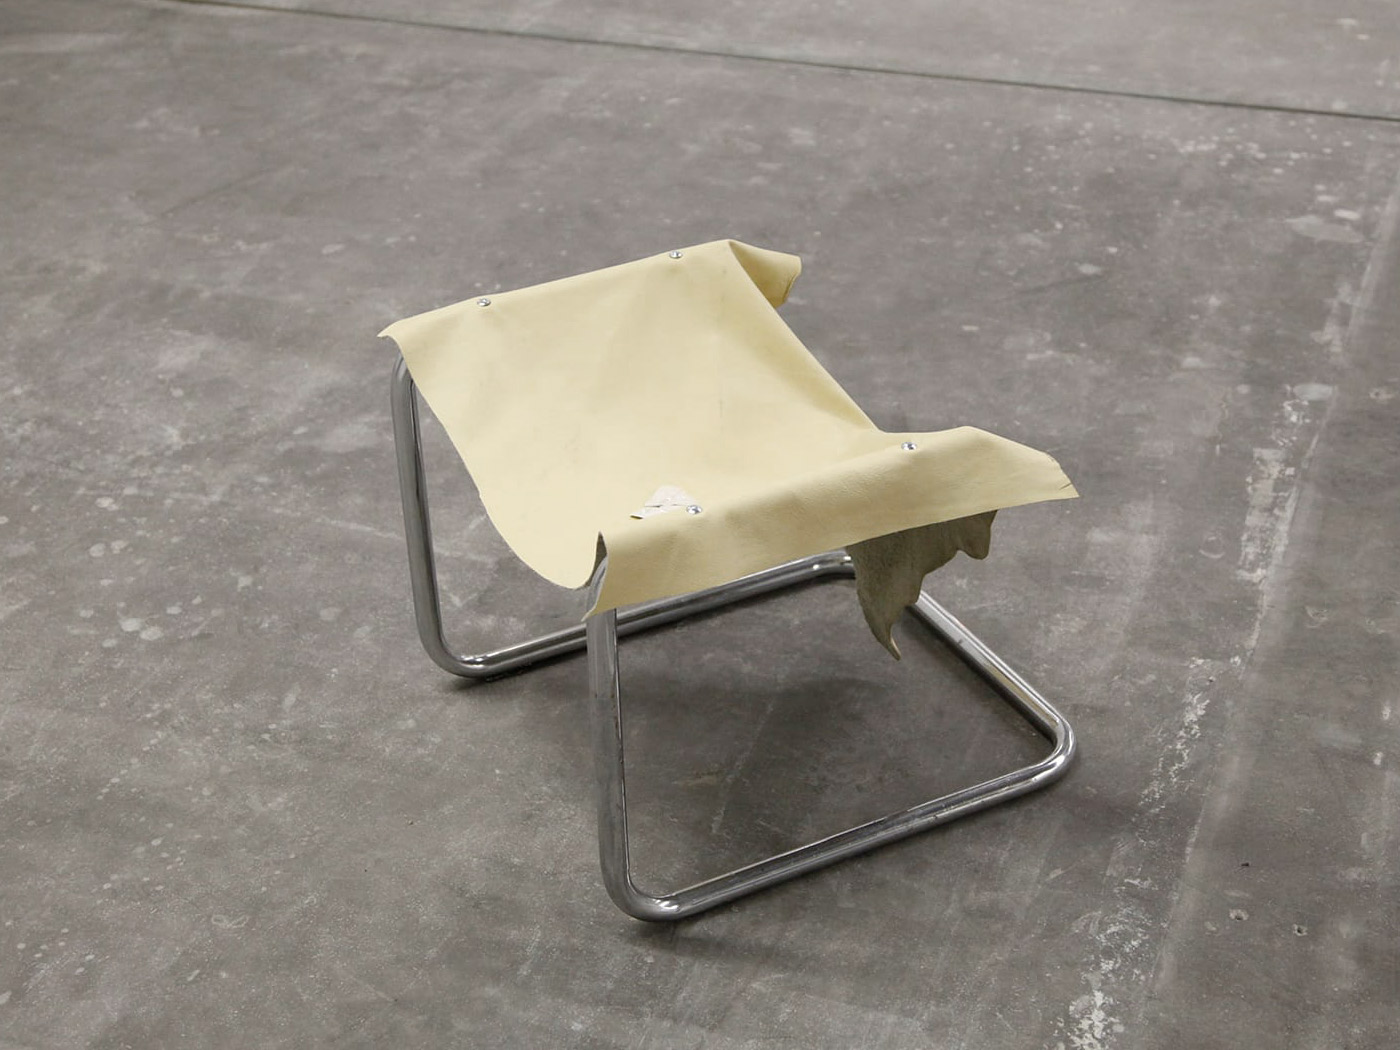 Cantilever chair with nicotine-yellow leather seat that hangs down towards the back